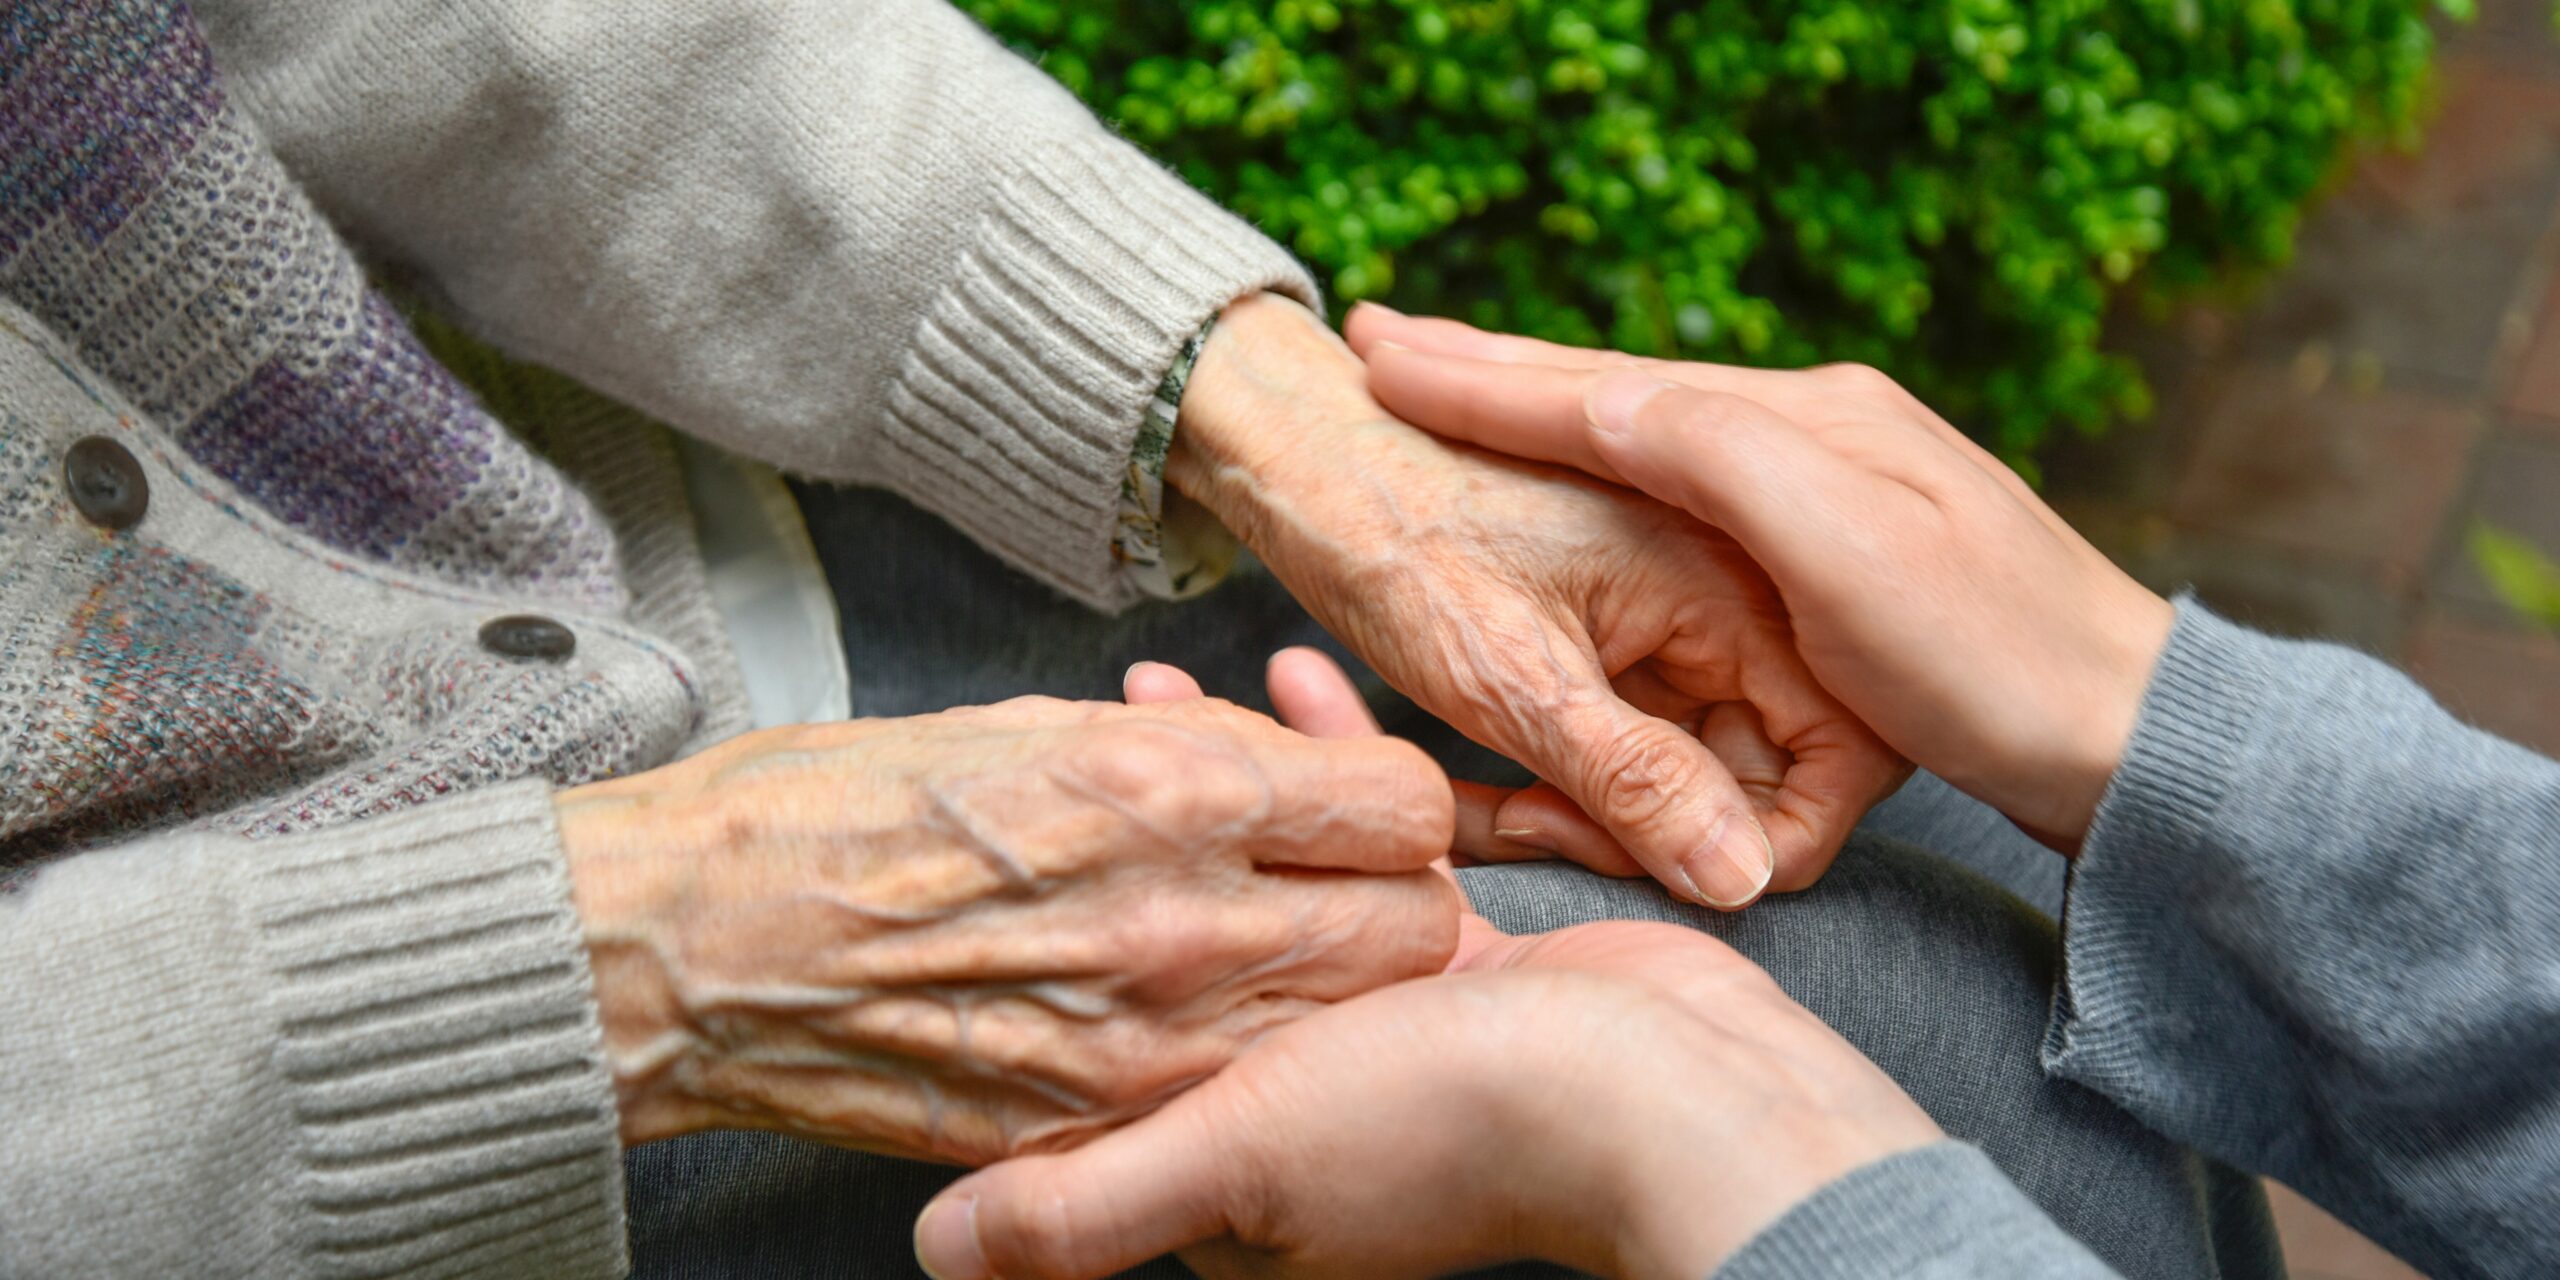 Touches the hands of an old woman - Concept of Elderly care.